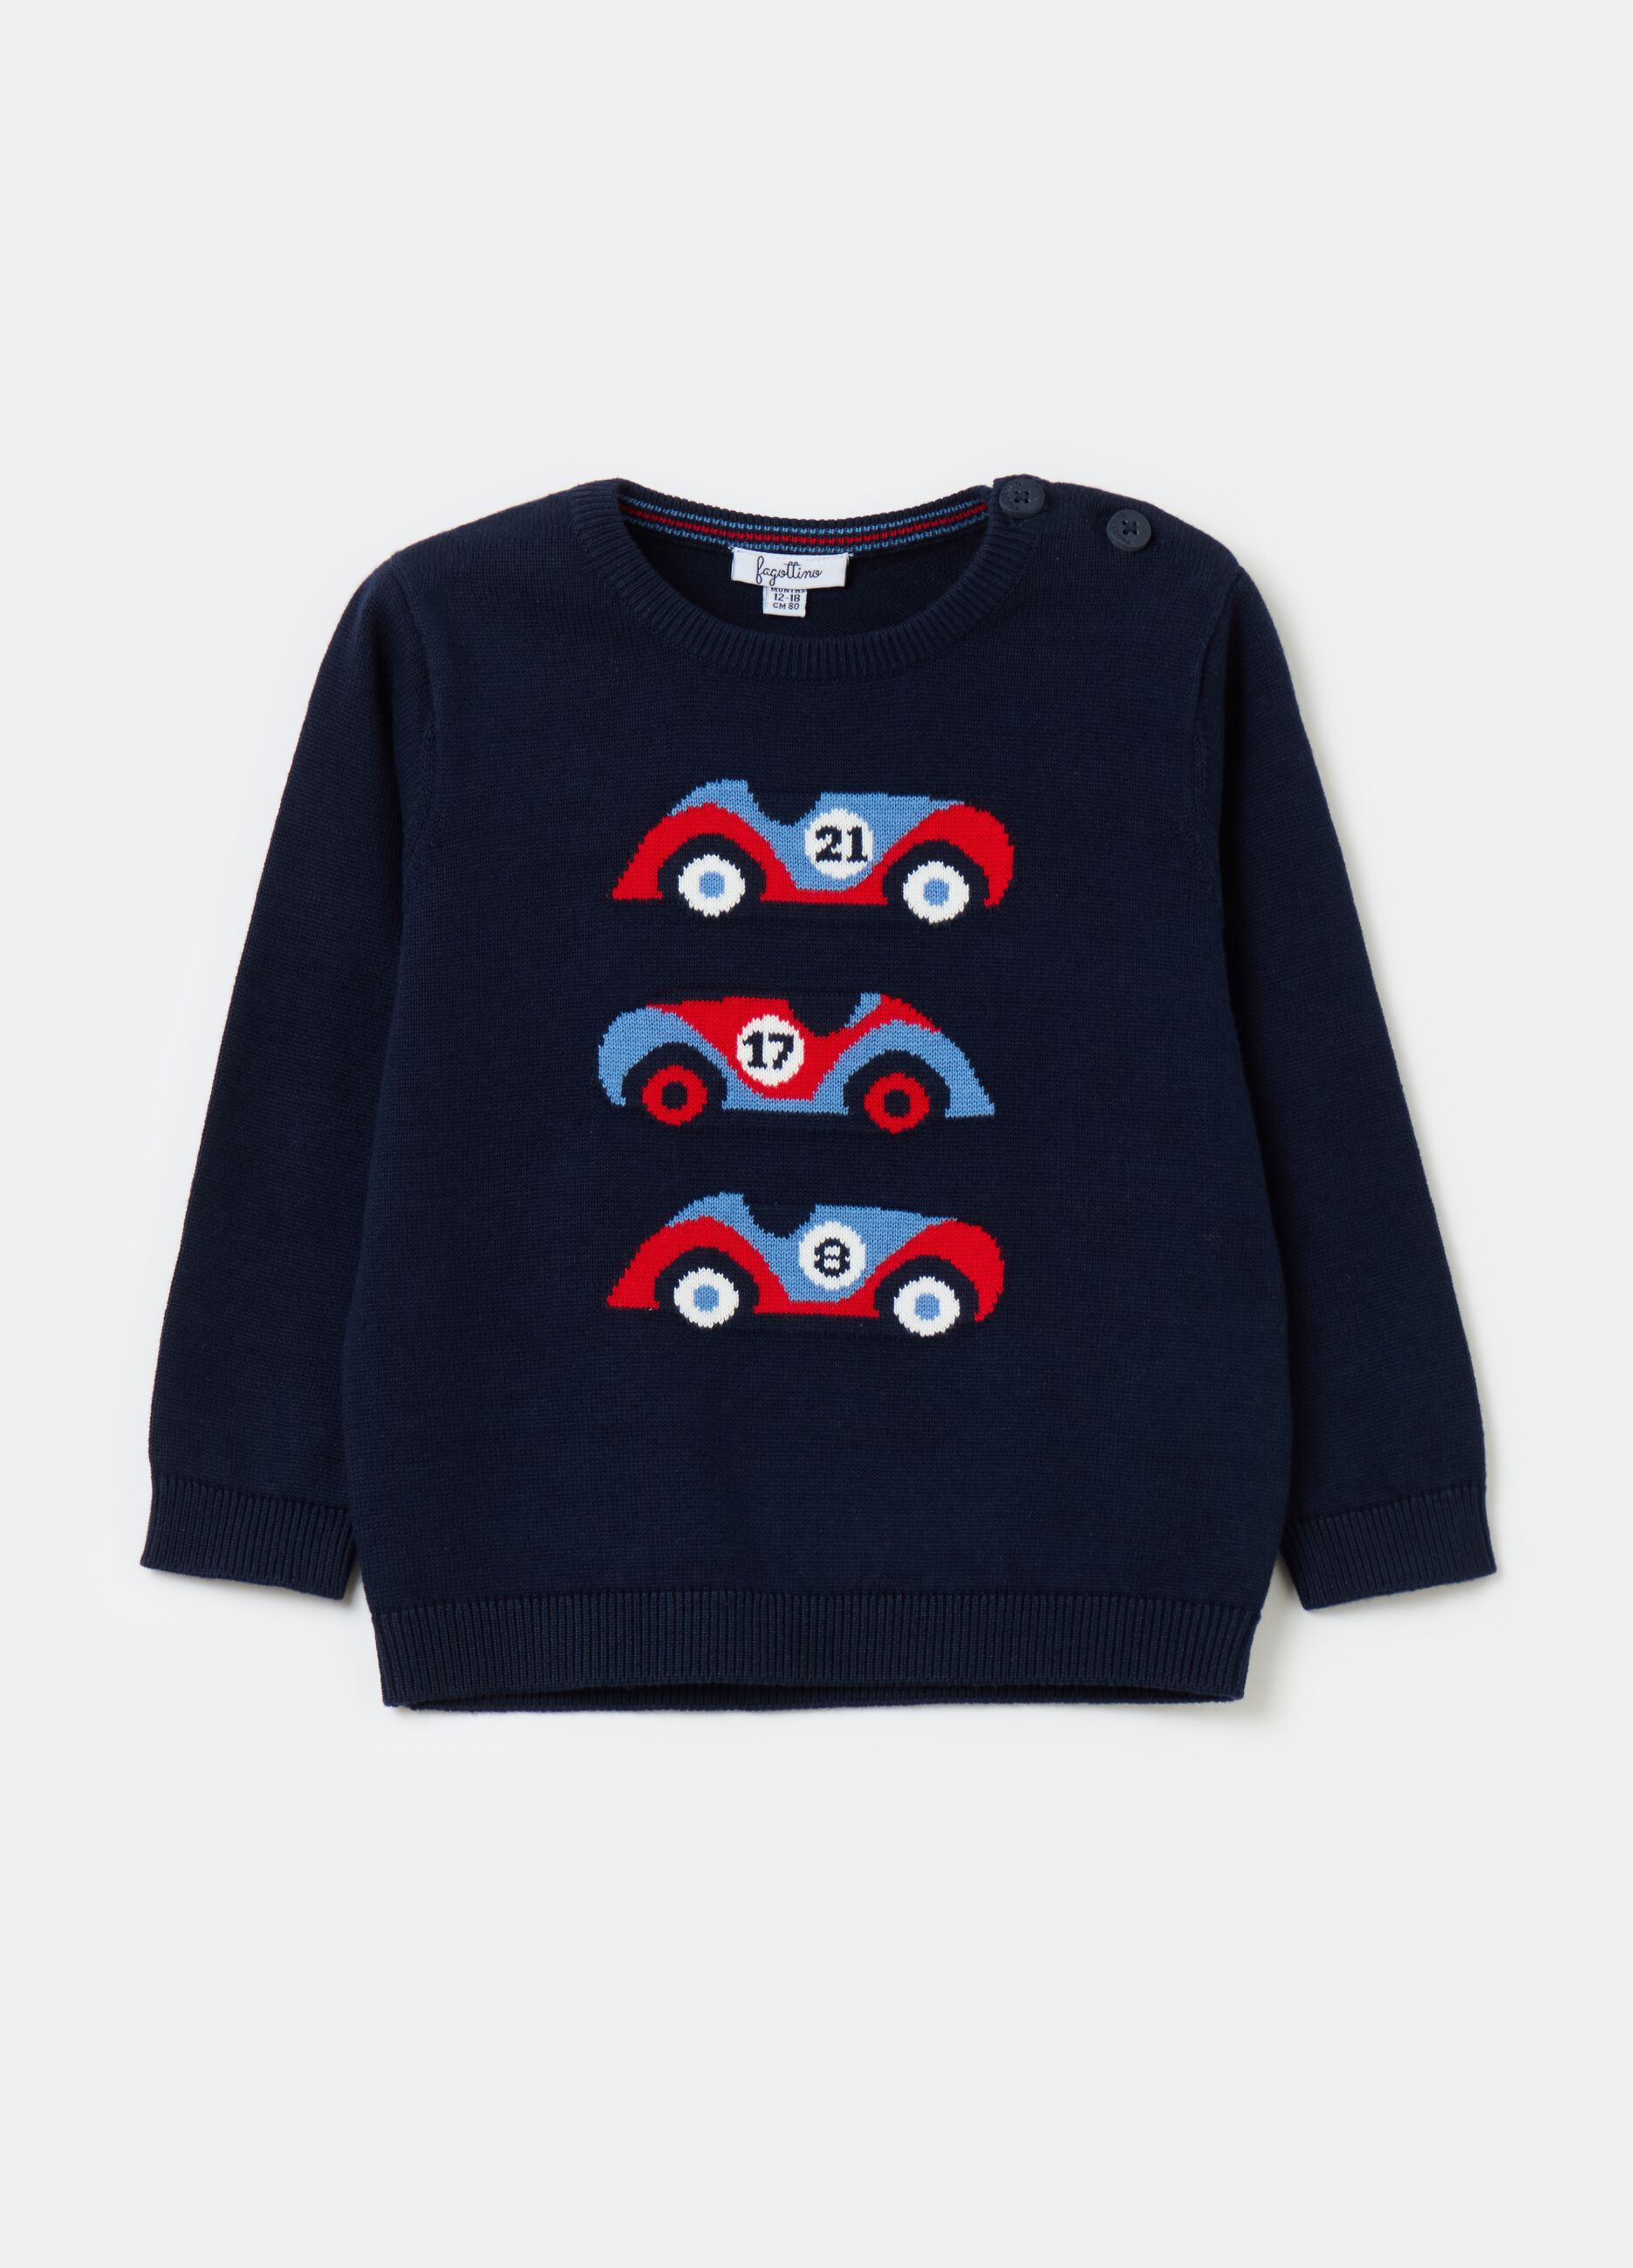 Pullover with jacquard cars design